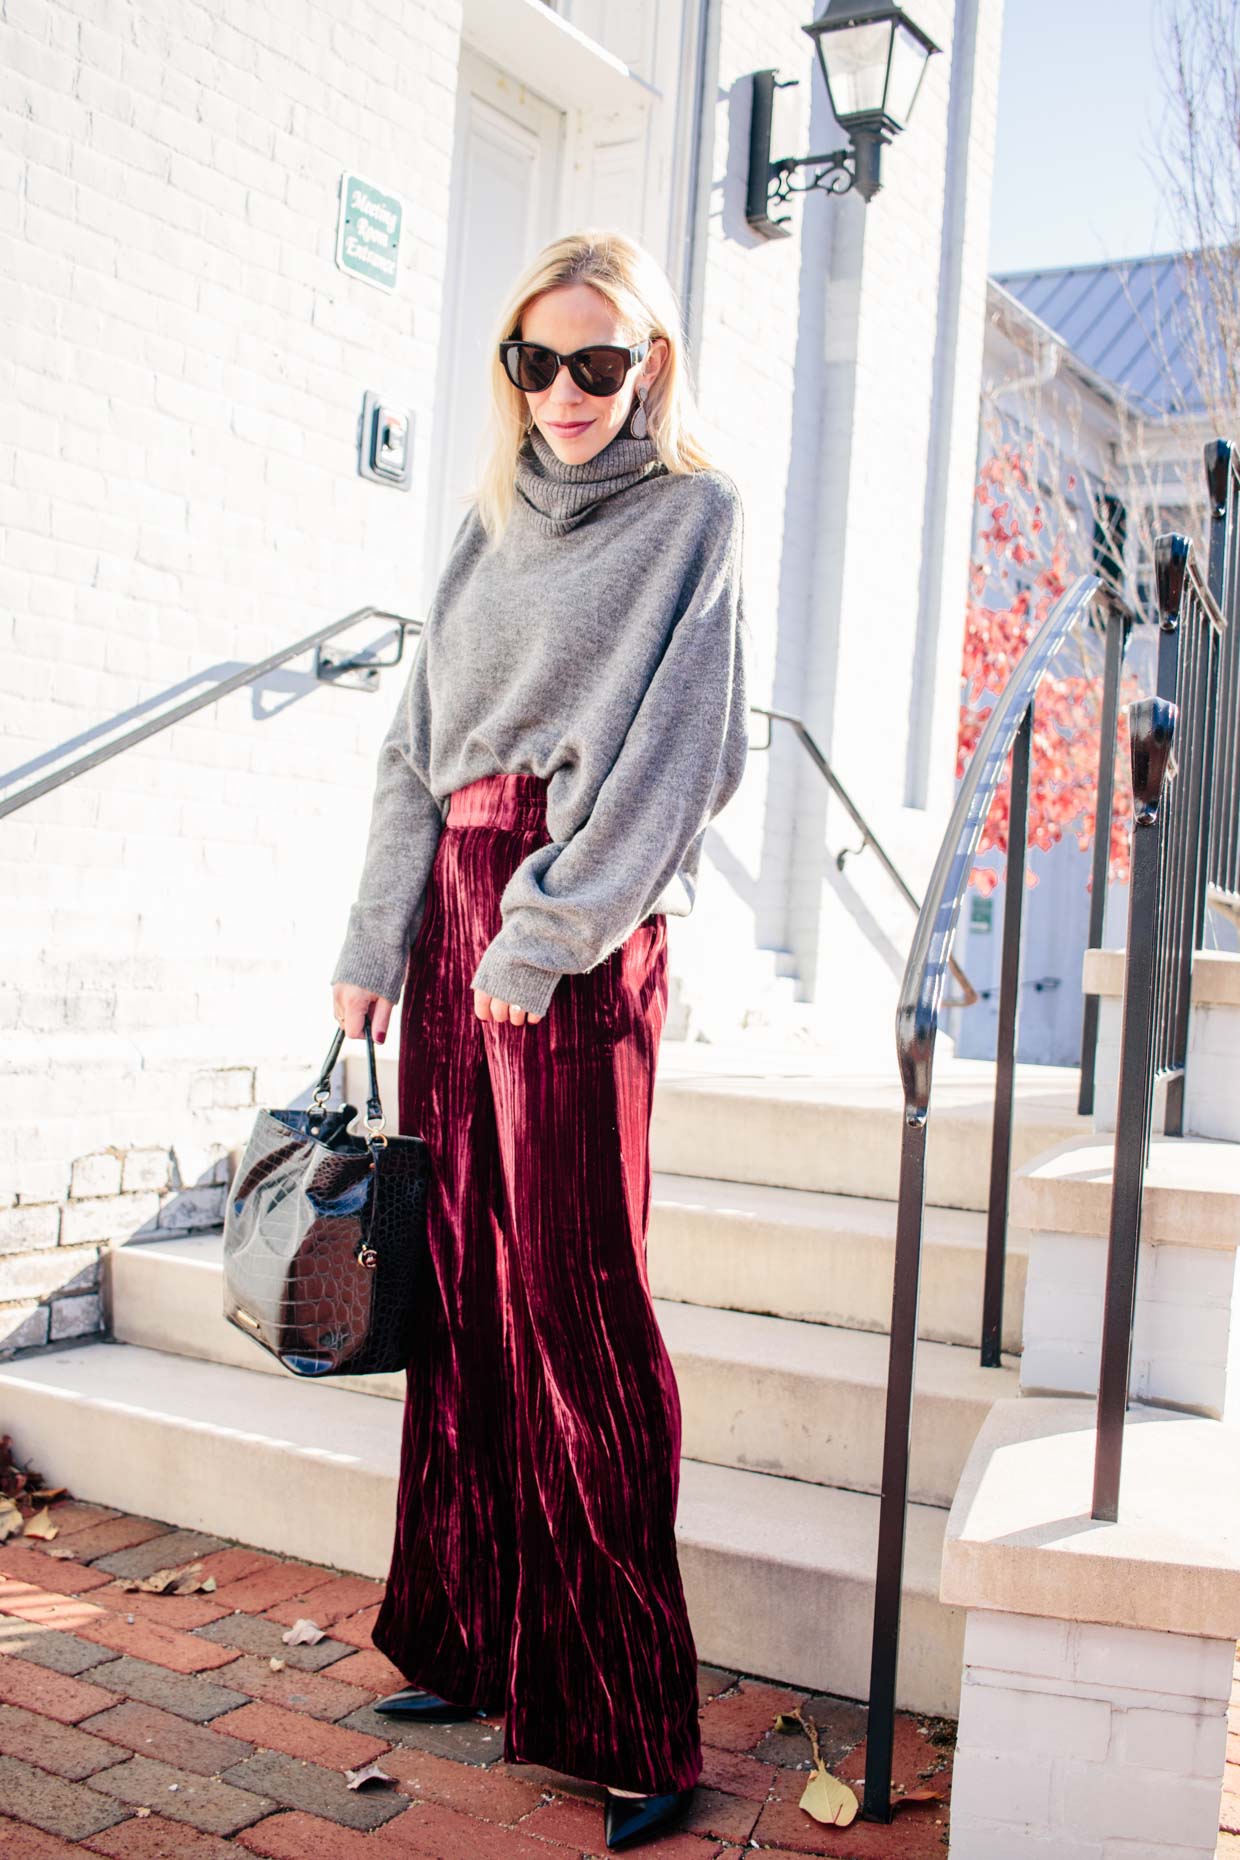 Meagan Brandon fashion blogger of Meagan's Moda wears gray oversized  turtleneck sweater with red velvet pants for chic cozy holiday outfit -  Meagan's Moda